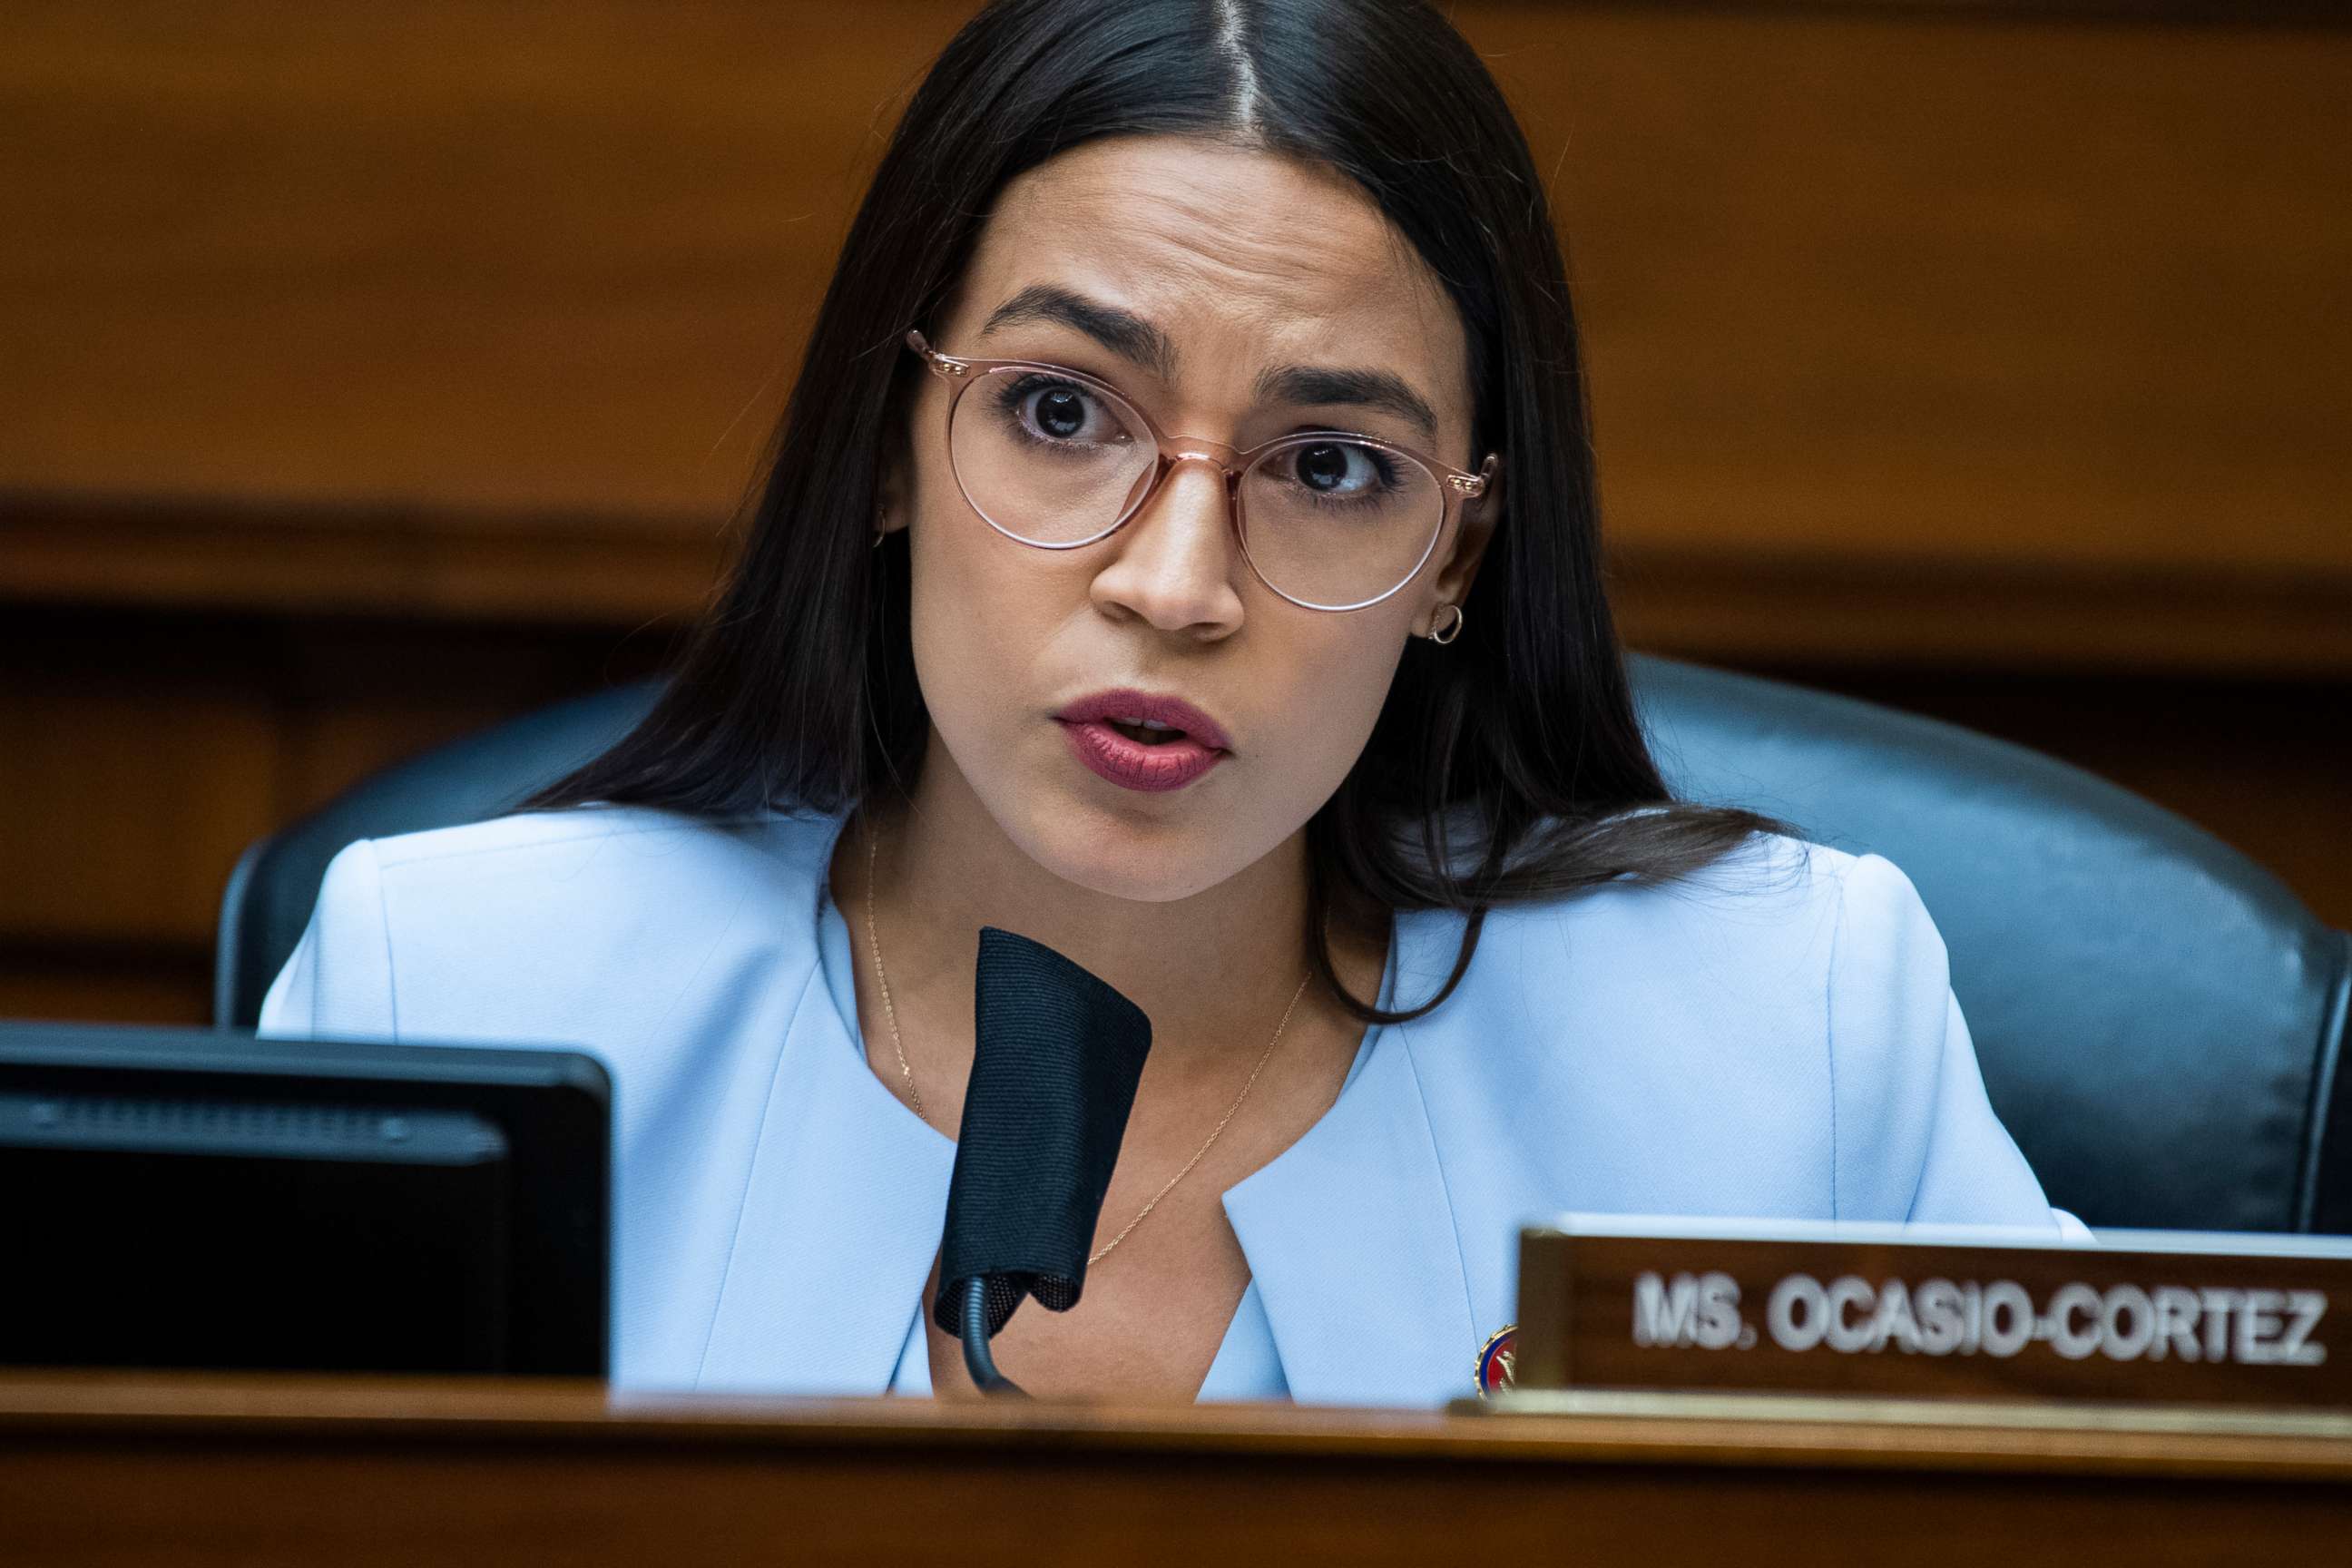 PHOTO: U.S. Rep. Alexandria Ocasio-Cortez, D-N.Y., questions Postmaster General Louis DeJoy during a House Committee on Oversight and Reform hearing on the Postal Service on Capitol Hill in Washington, D.C., on Aug. 24, 2020.